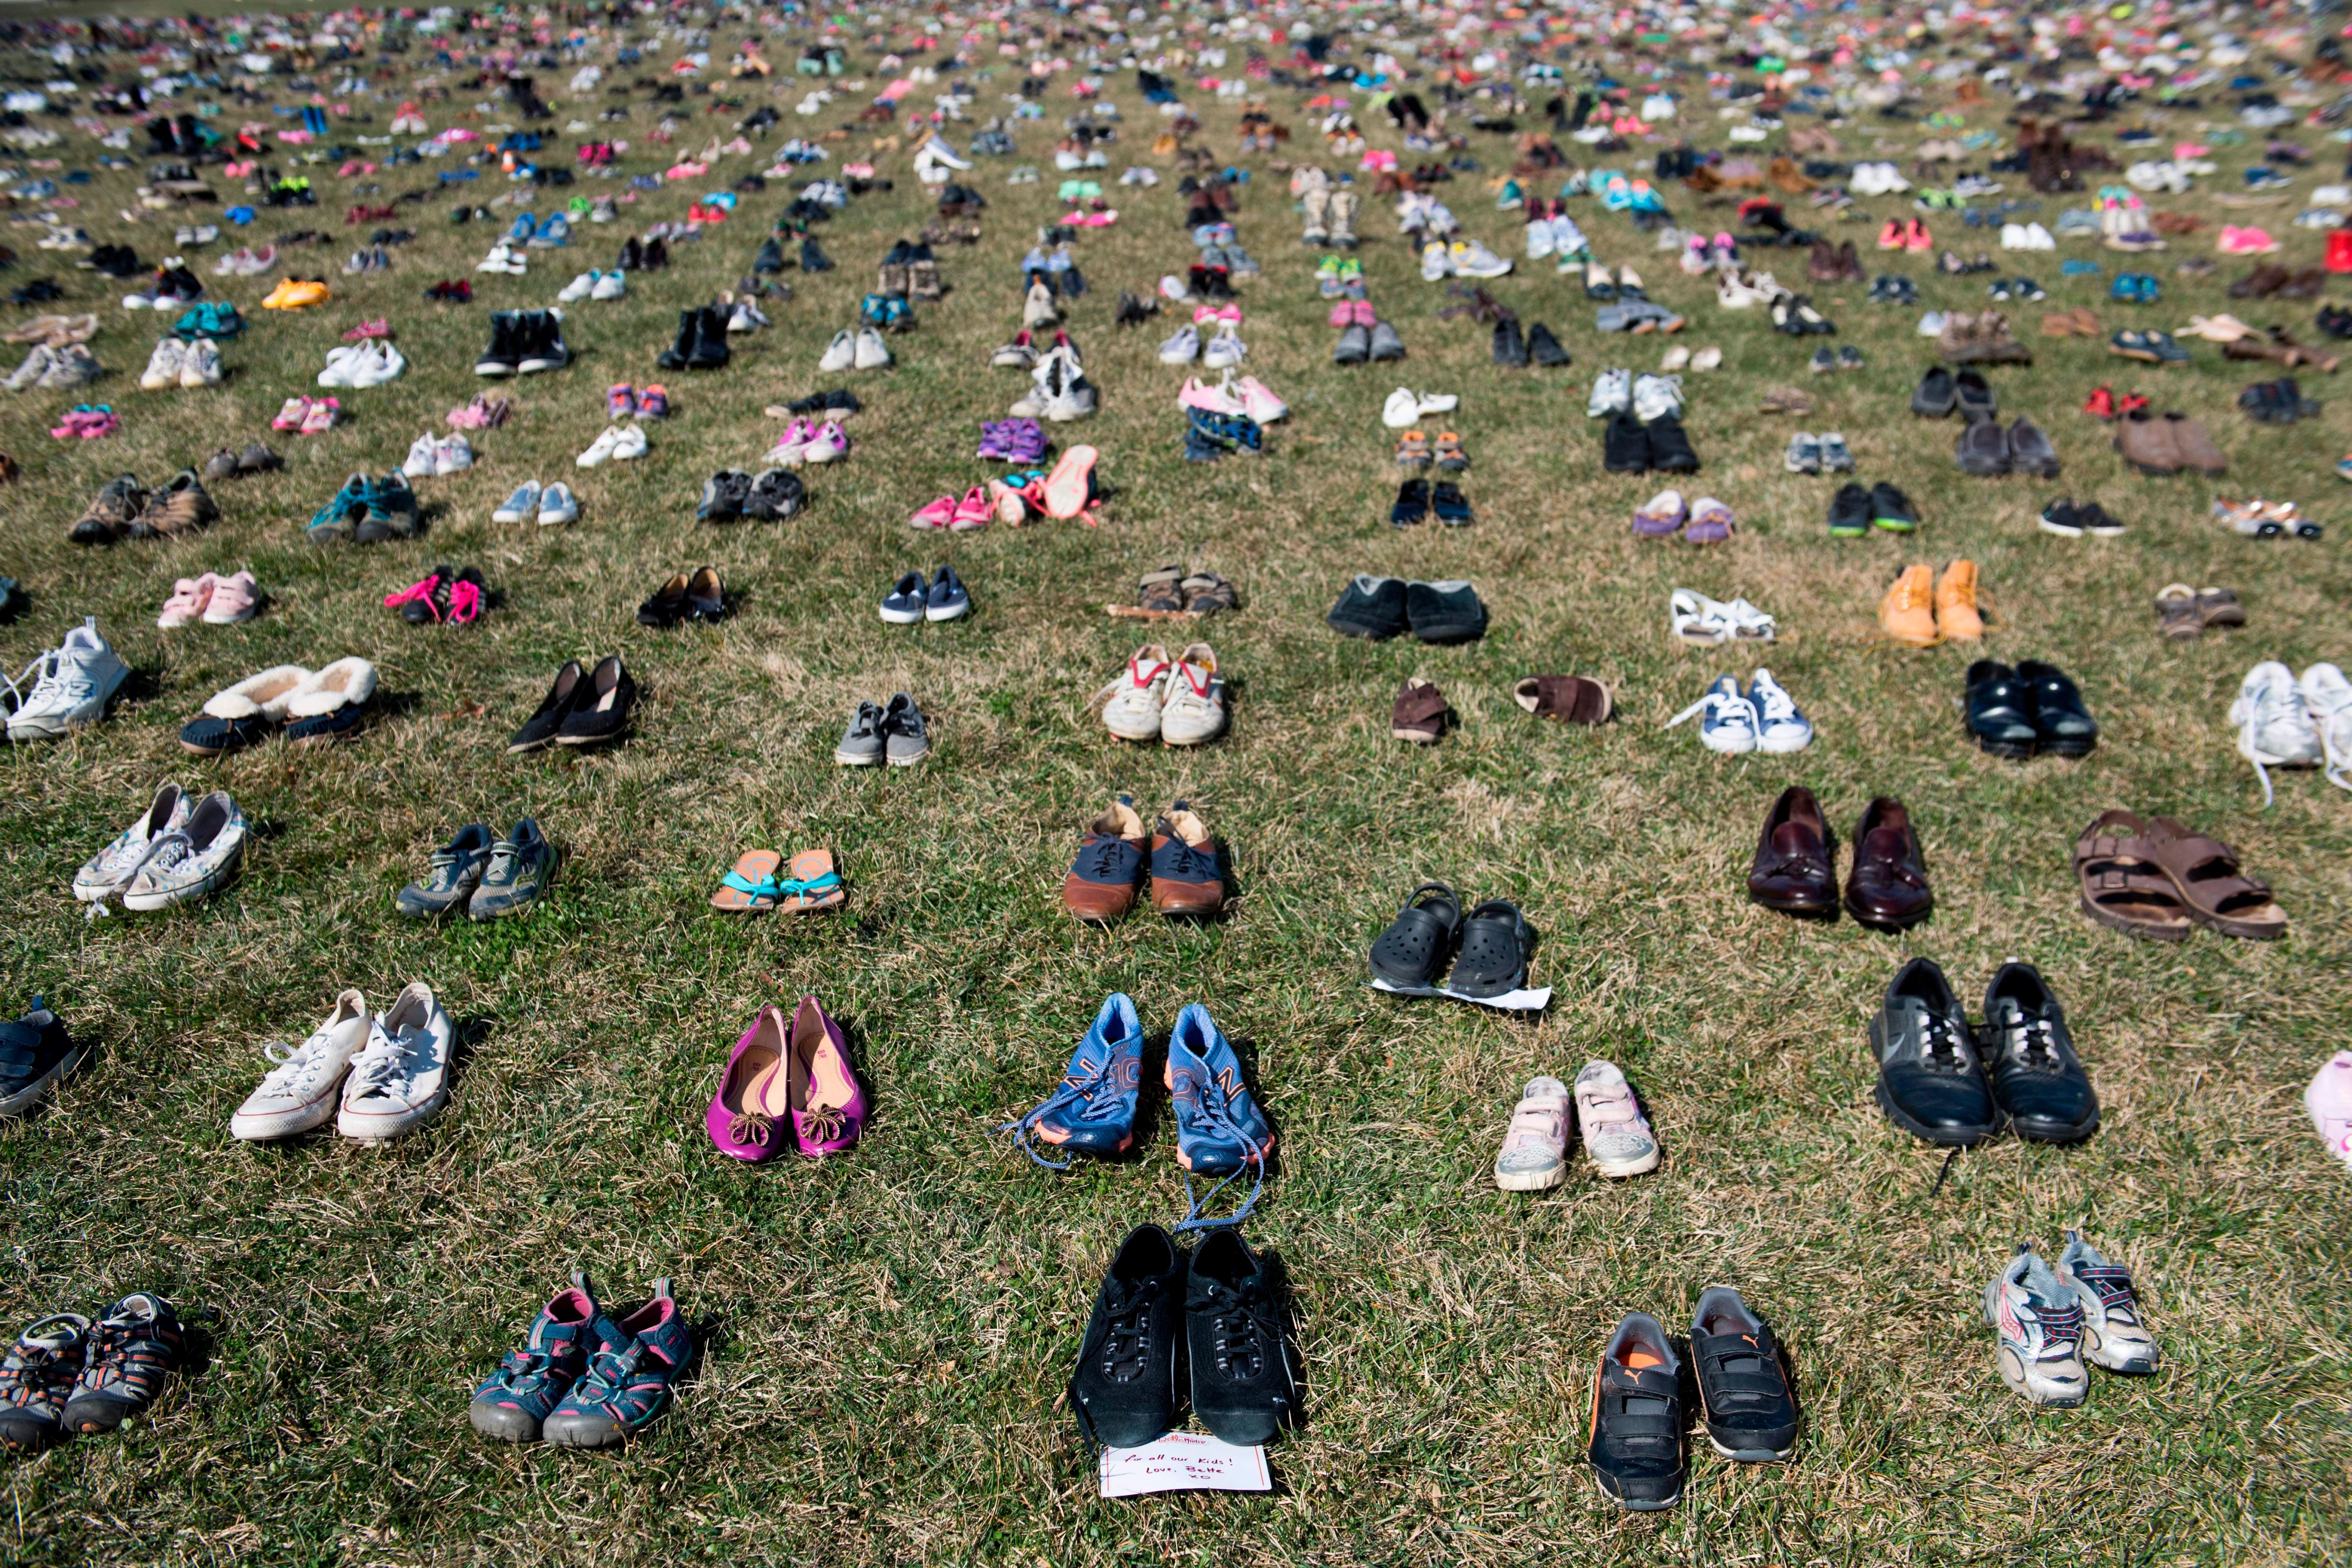 7,000 pairs of shoes are displayed on the grass outside the U.S. Capitol on March 13, 2018, to memorialize the children killed in gun violence since the Sandy Hook school shooting. (Saul Loeb—AFP/Getty Images)